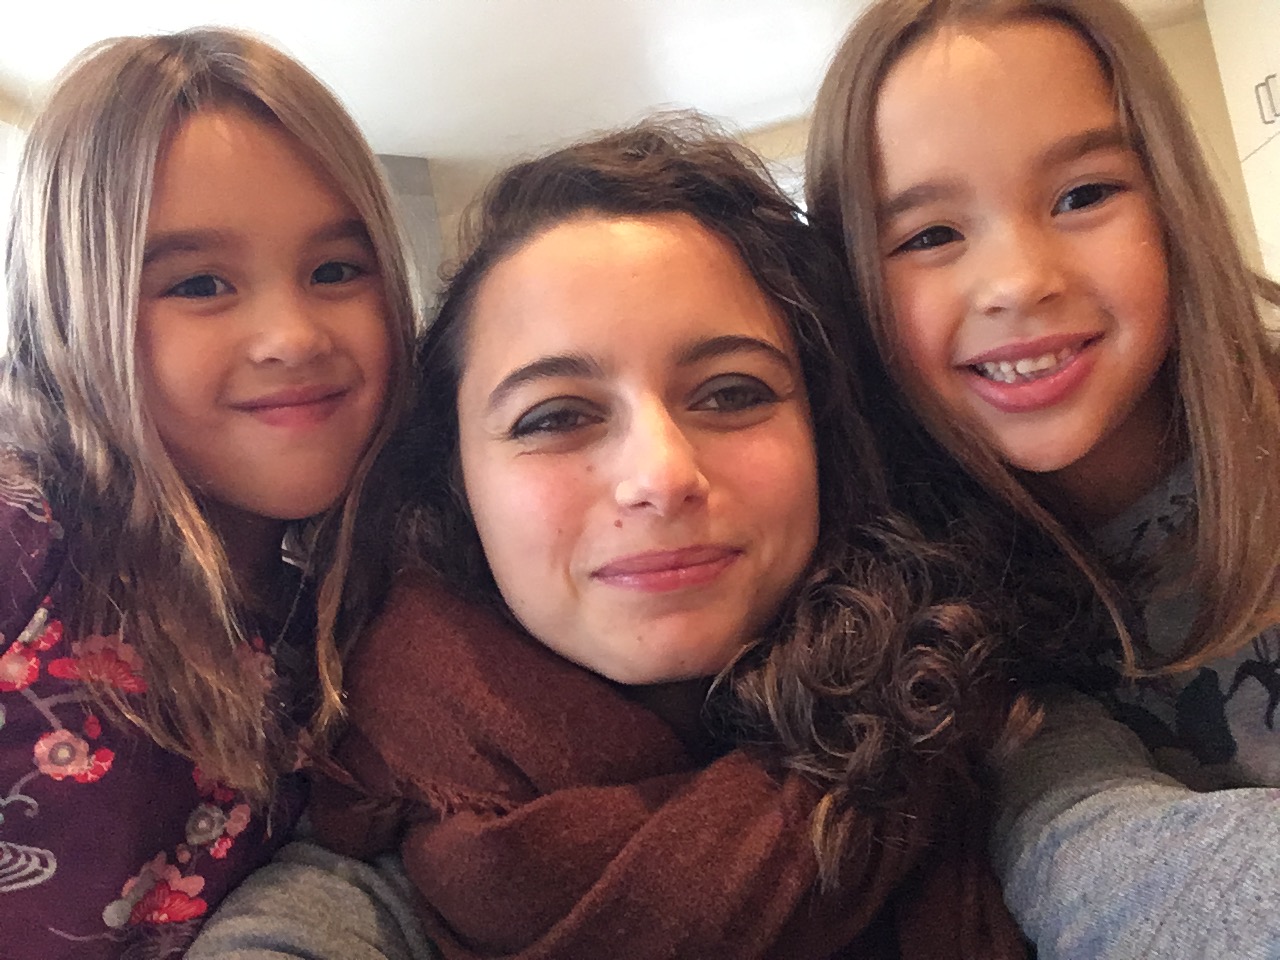 Au Pair Amandine is taking a selfie with her two 6 year old host girls.